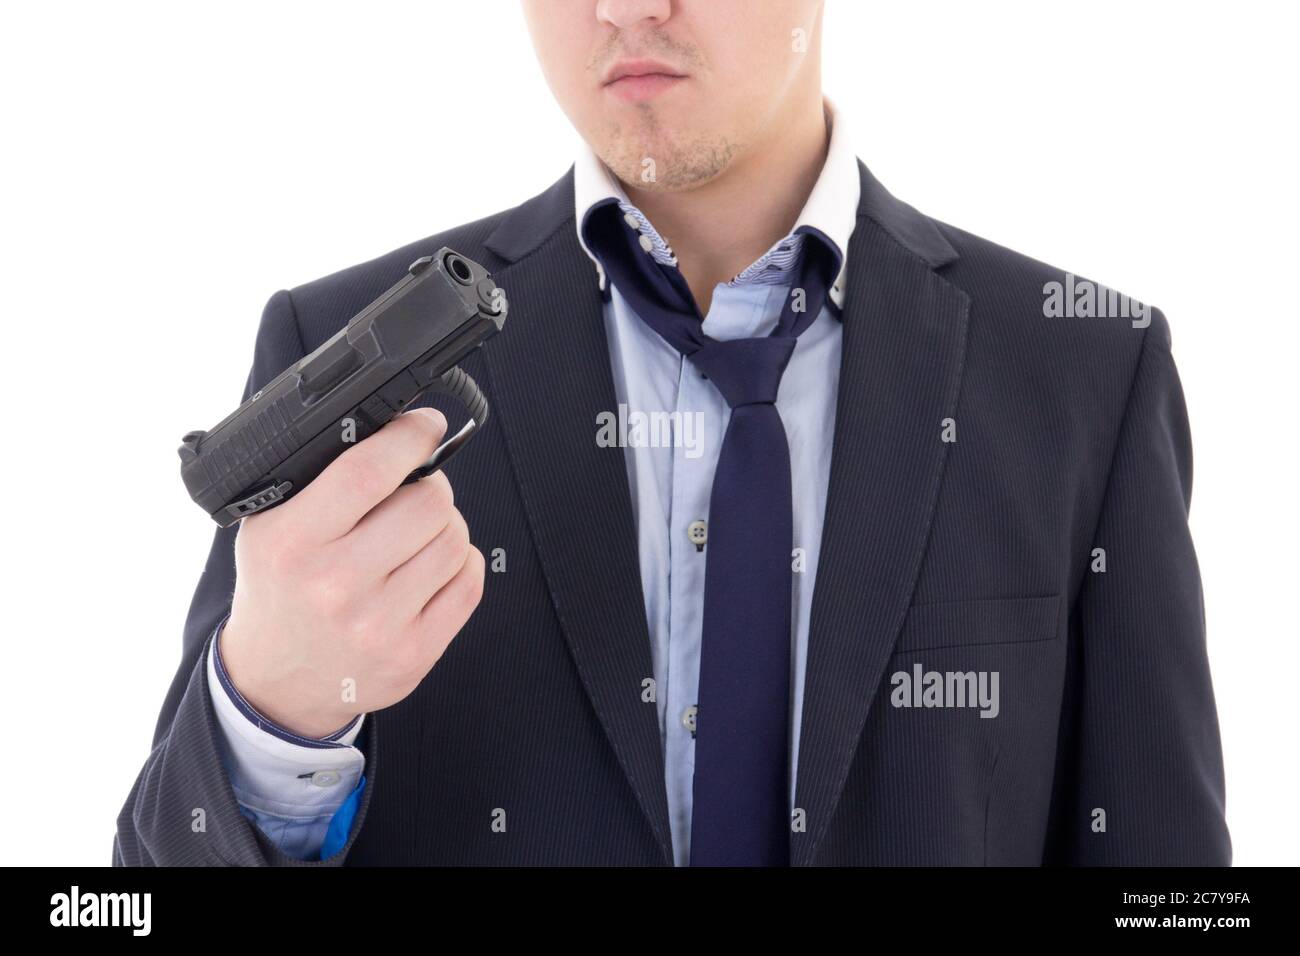 stressed man in business suit holding gun isolated on white background Stock Photo